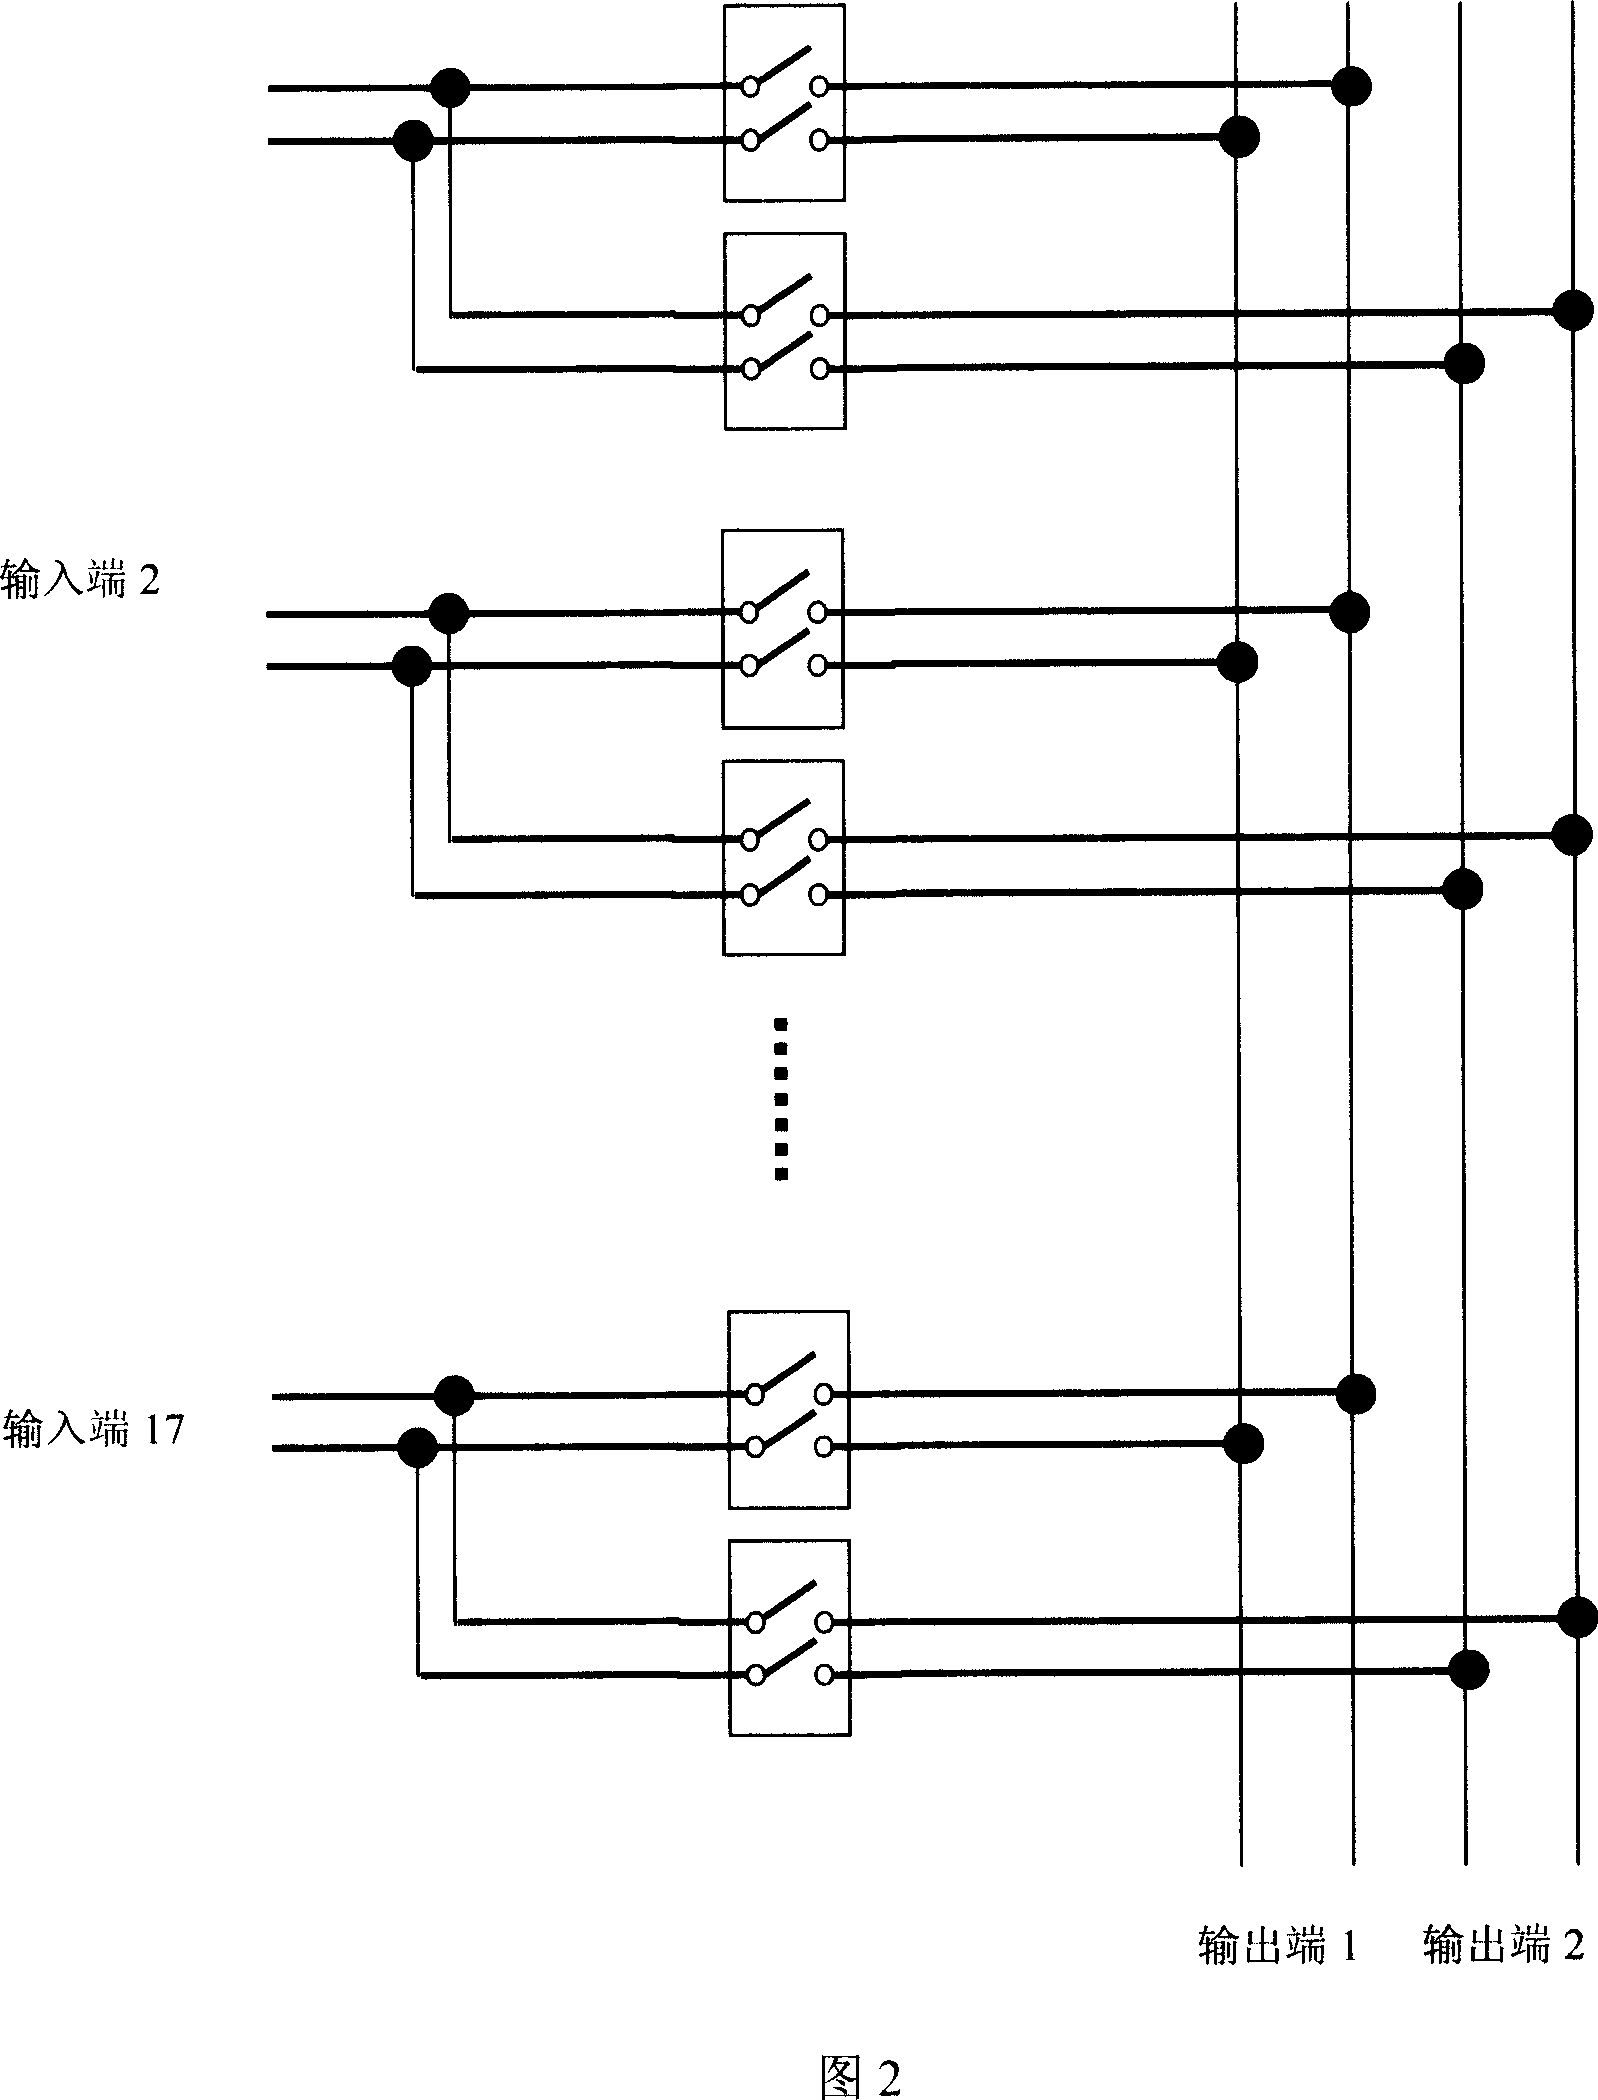 Automatic line switching device for DSL device test